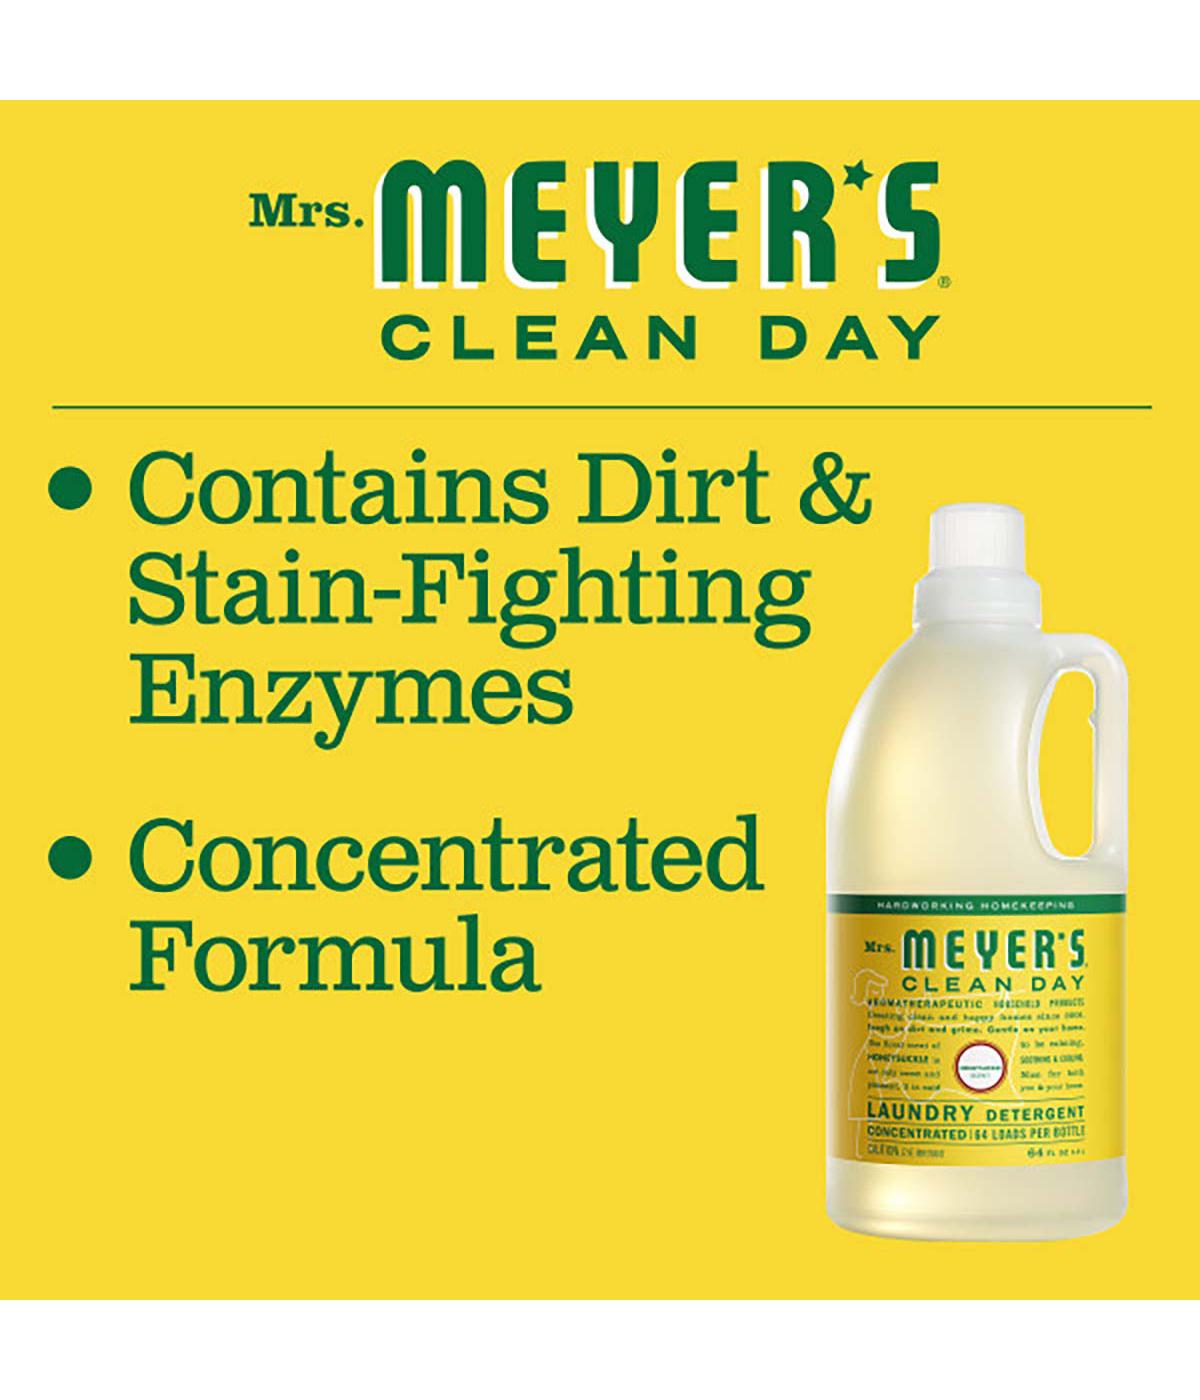 Mrs. Meyer's Clean Day Honeysuckle Scent Concentrated Laundry Detergent, 64 Loads; image 4 of 4